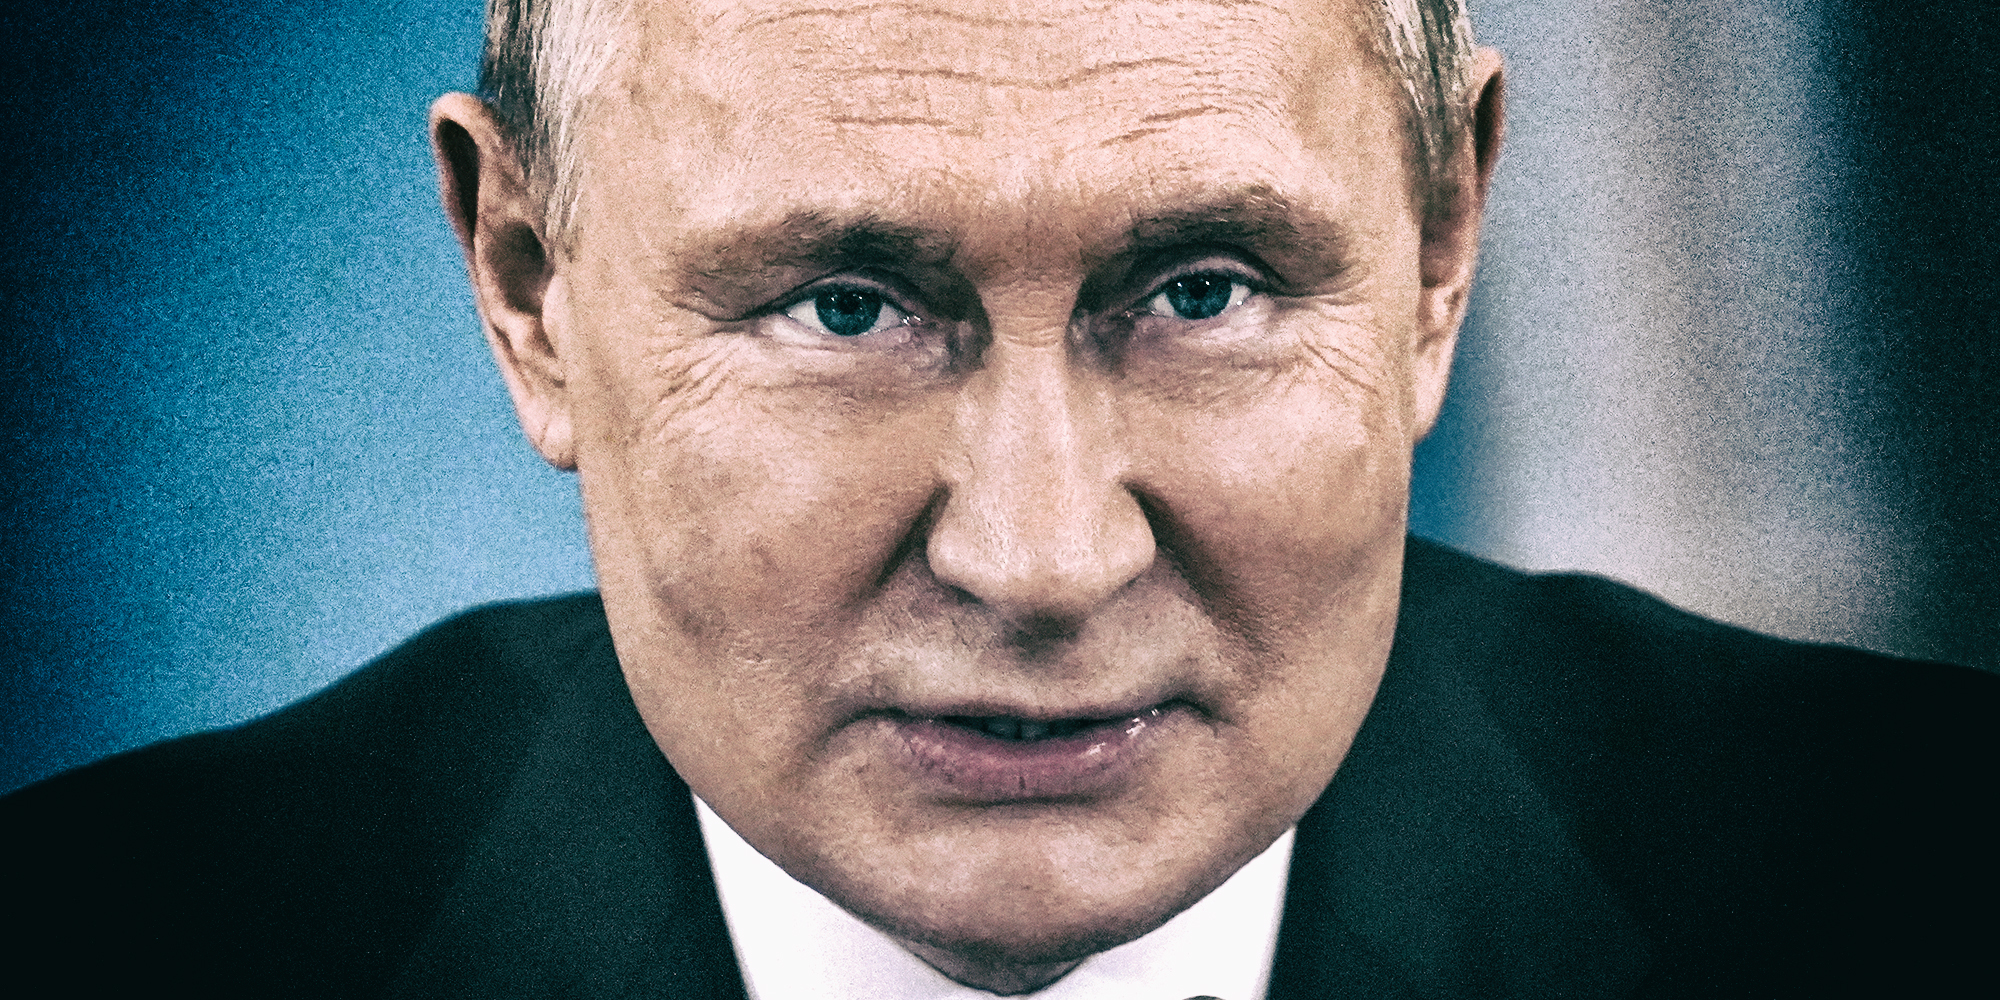 Putin’s crown is slipping, and he is at risk of losing both the war and his throne